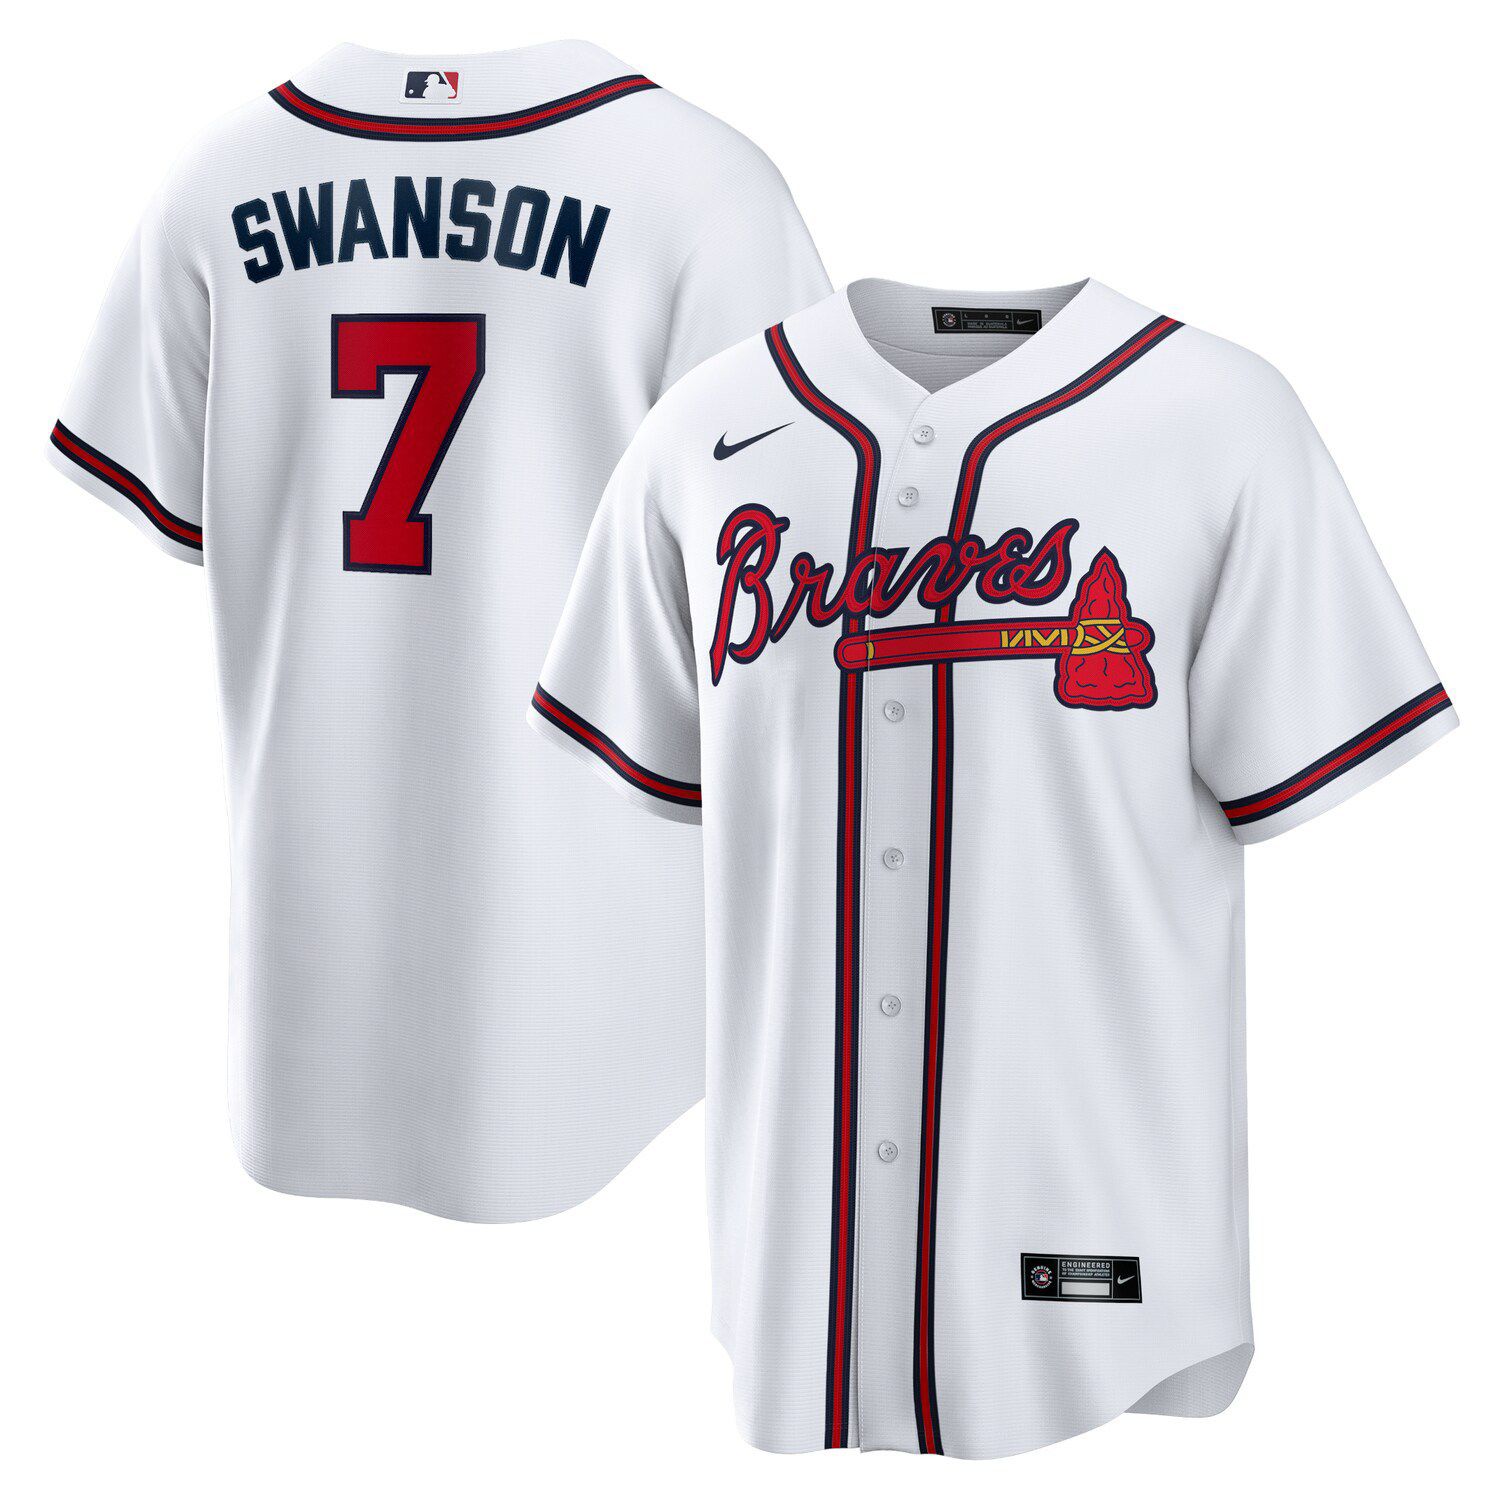 dansby swanson jersey number